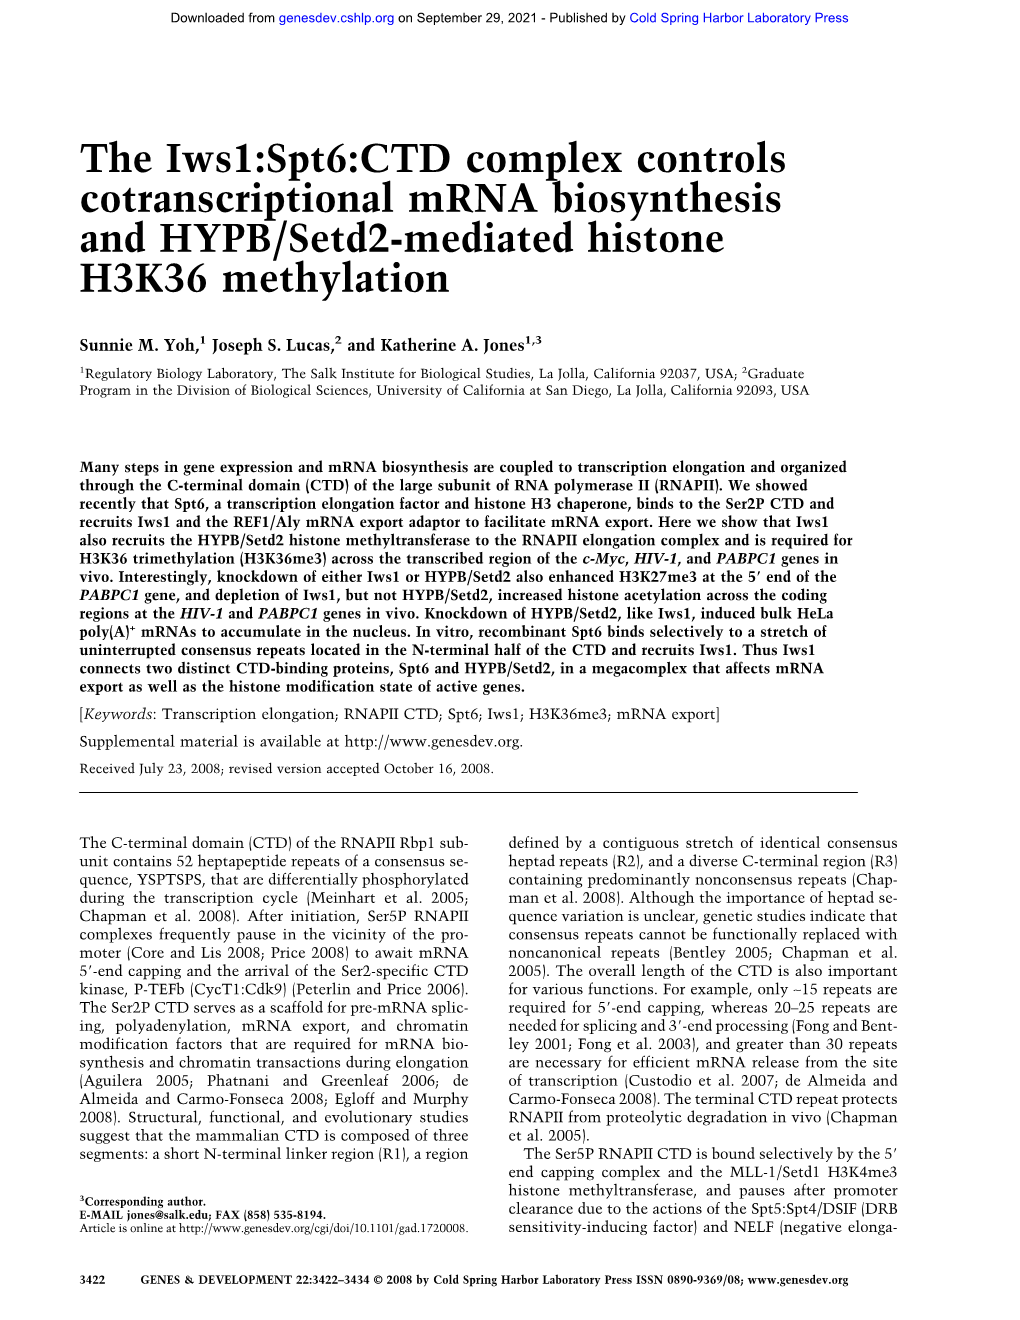 The Iws1:Spt6:CTD Complex Controls Cotranscriptional Mrna Biosynthesis and HYPB/Setd2-Mediated Histone H3K36 Methylation